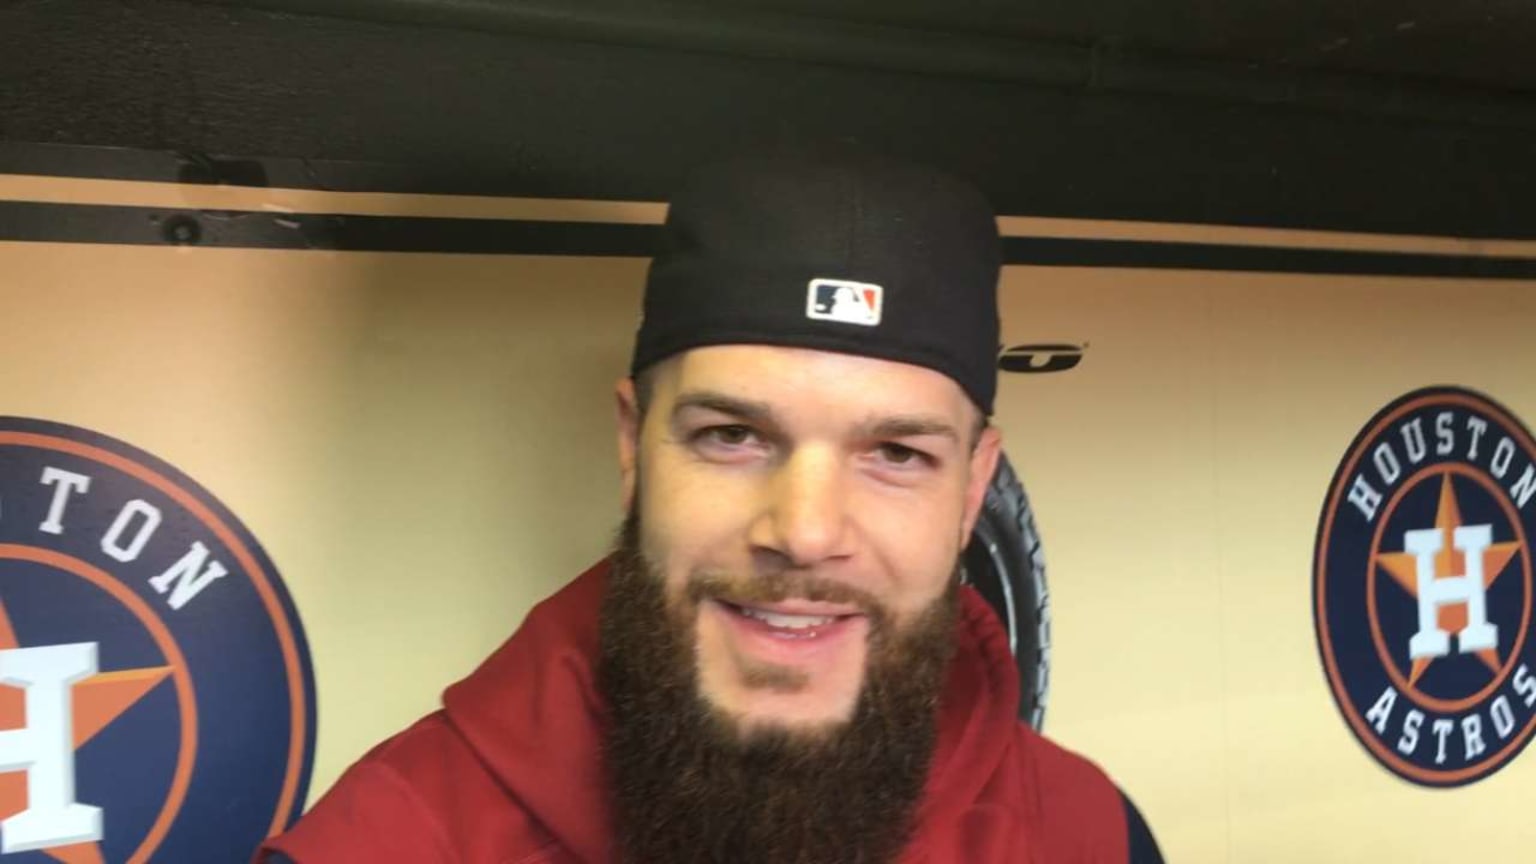 Astros pitcher Dallas Keuchel to be featured in ESPN's Body Issue